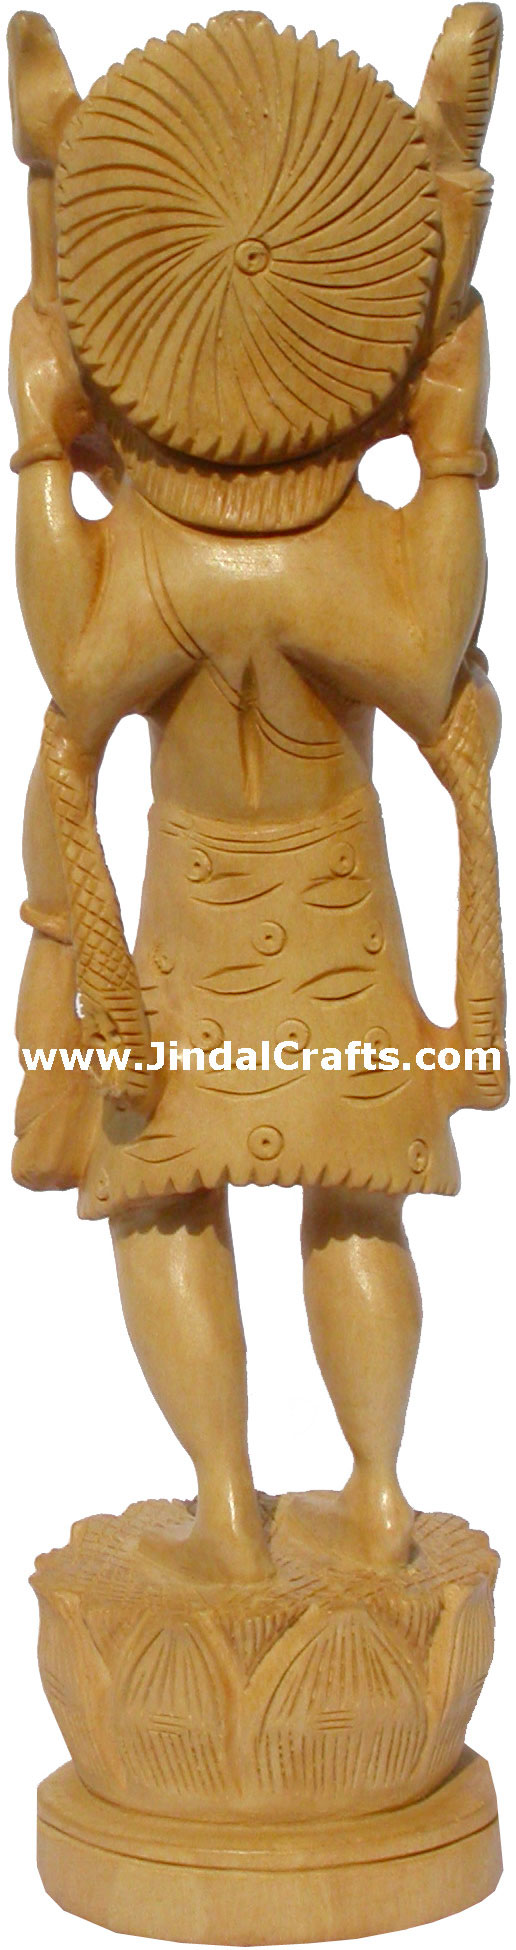 Wood Sculpture Lord Shiva Hand Made Statue Hinduism Indian Carving Home Decor